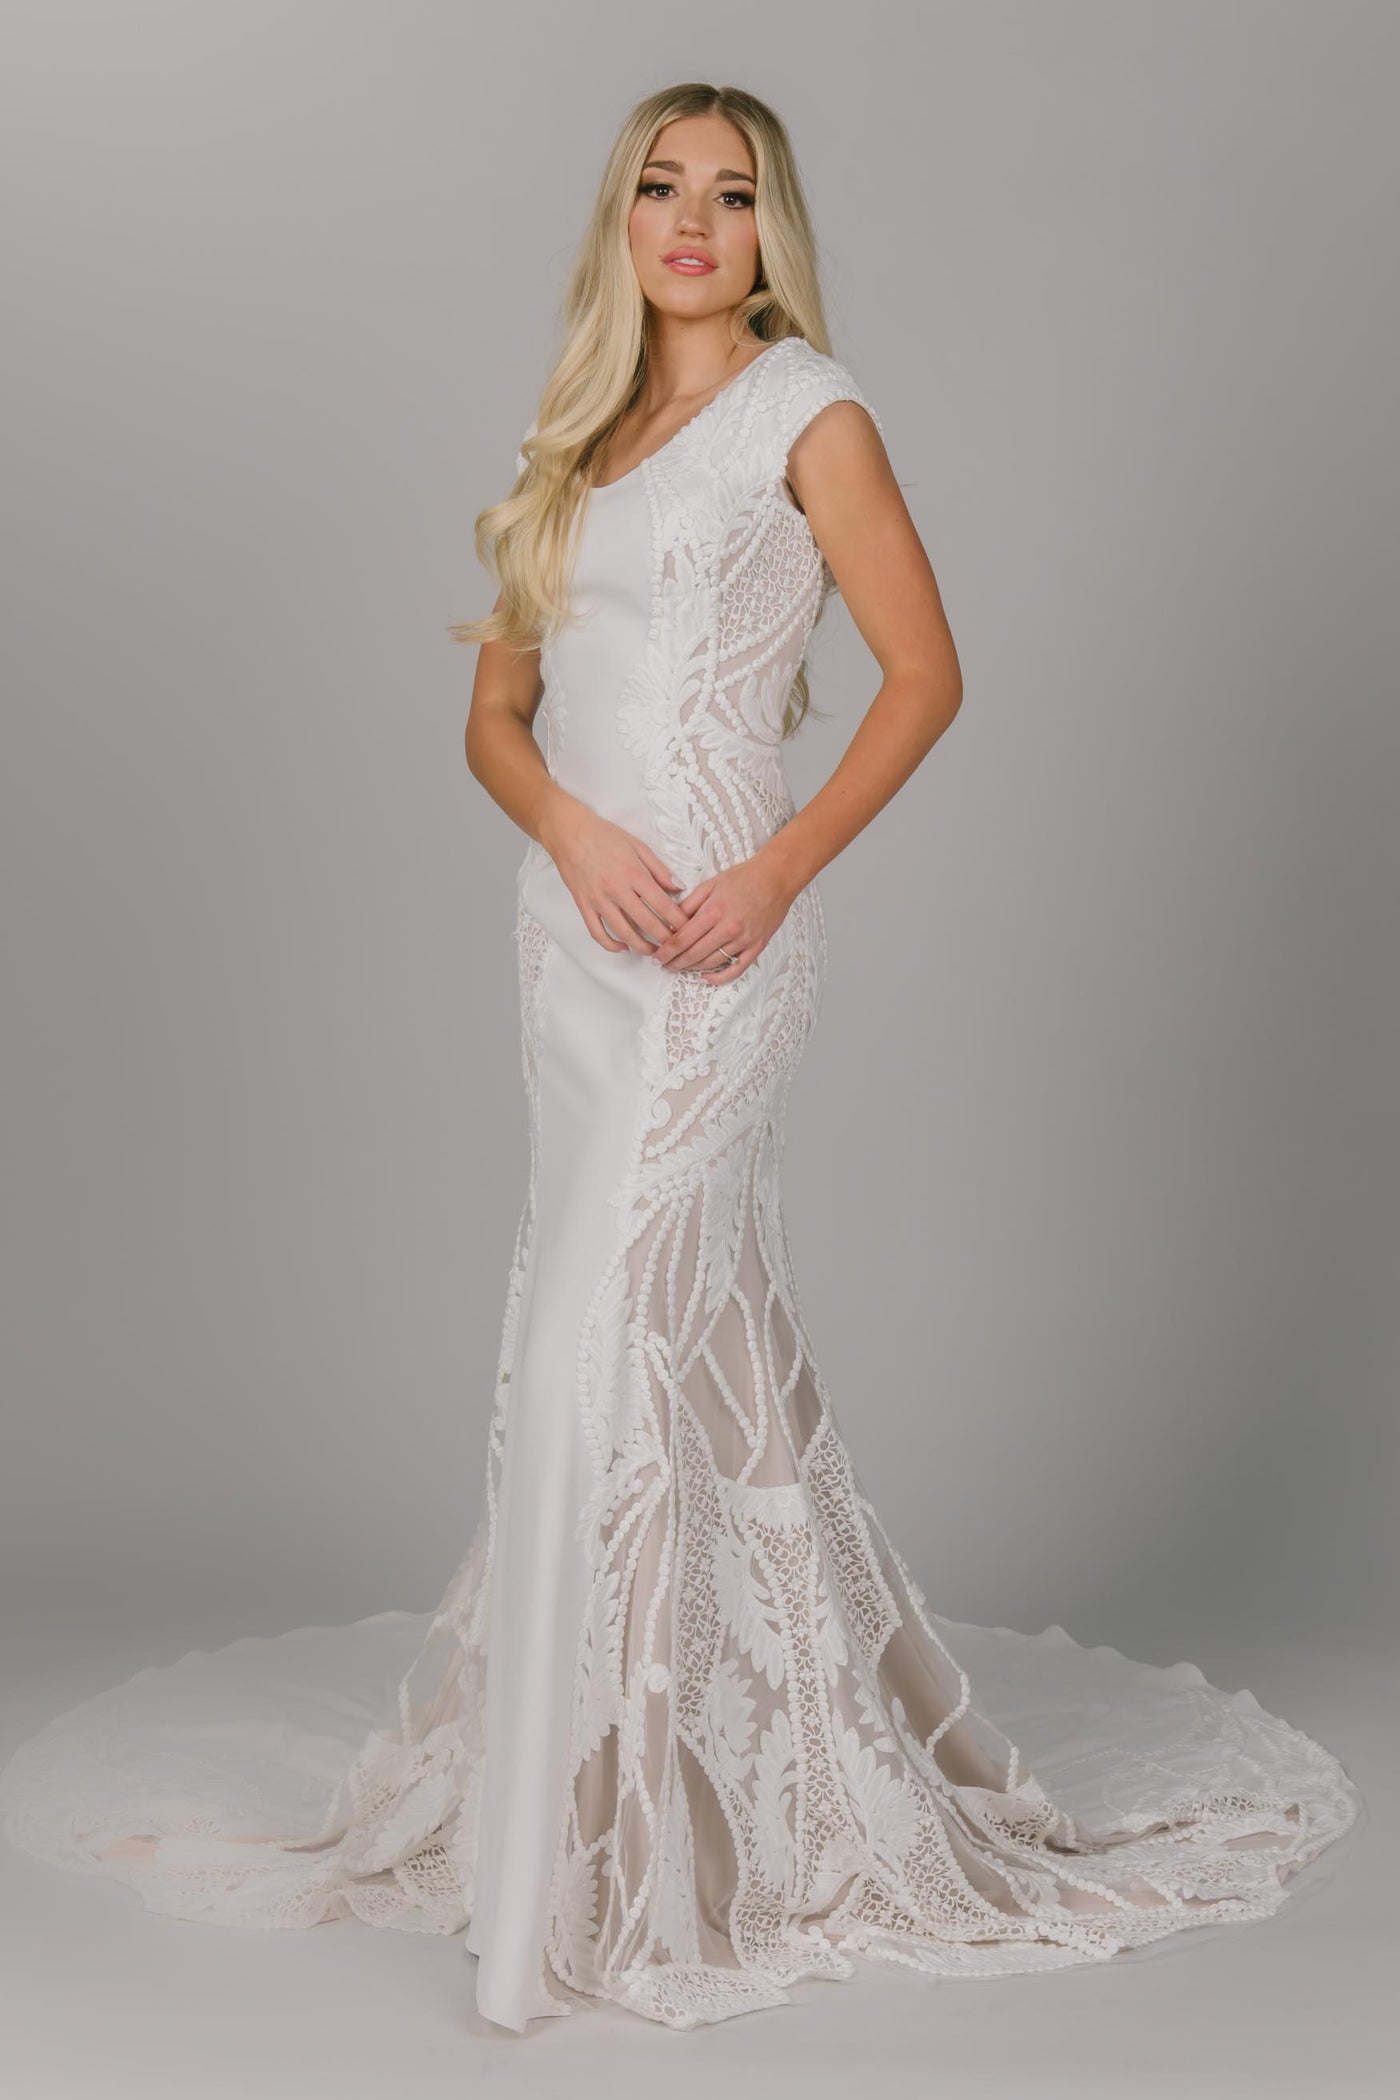 Boho style modest wedding dress. It has larger soft lace on the sides of the dresses. It has a v-neckline and has a fitted fit. It is cap sleeved but easy to move in.